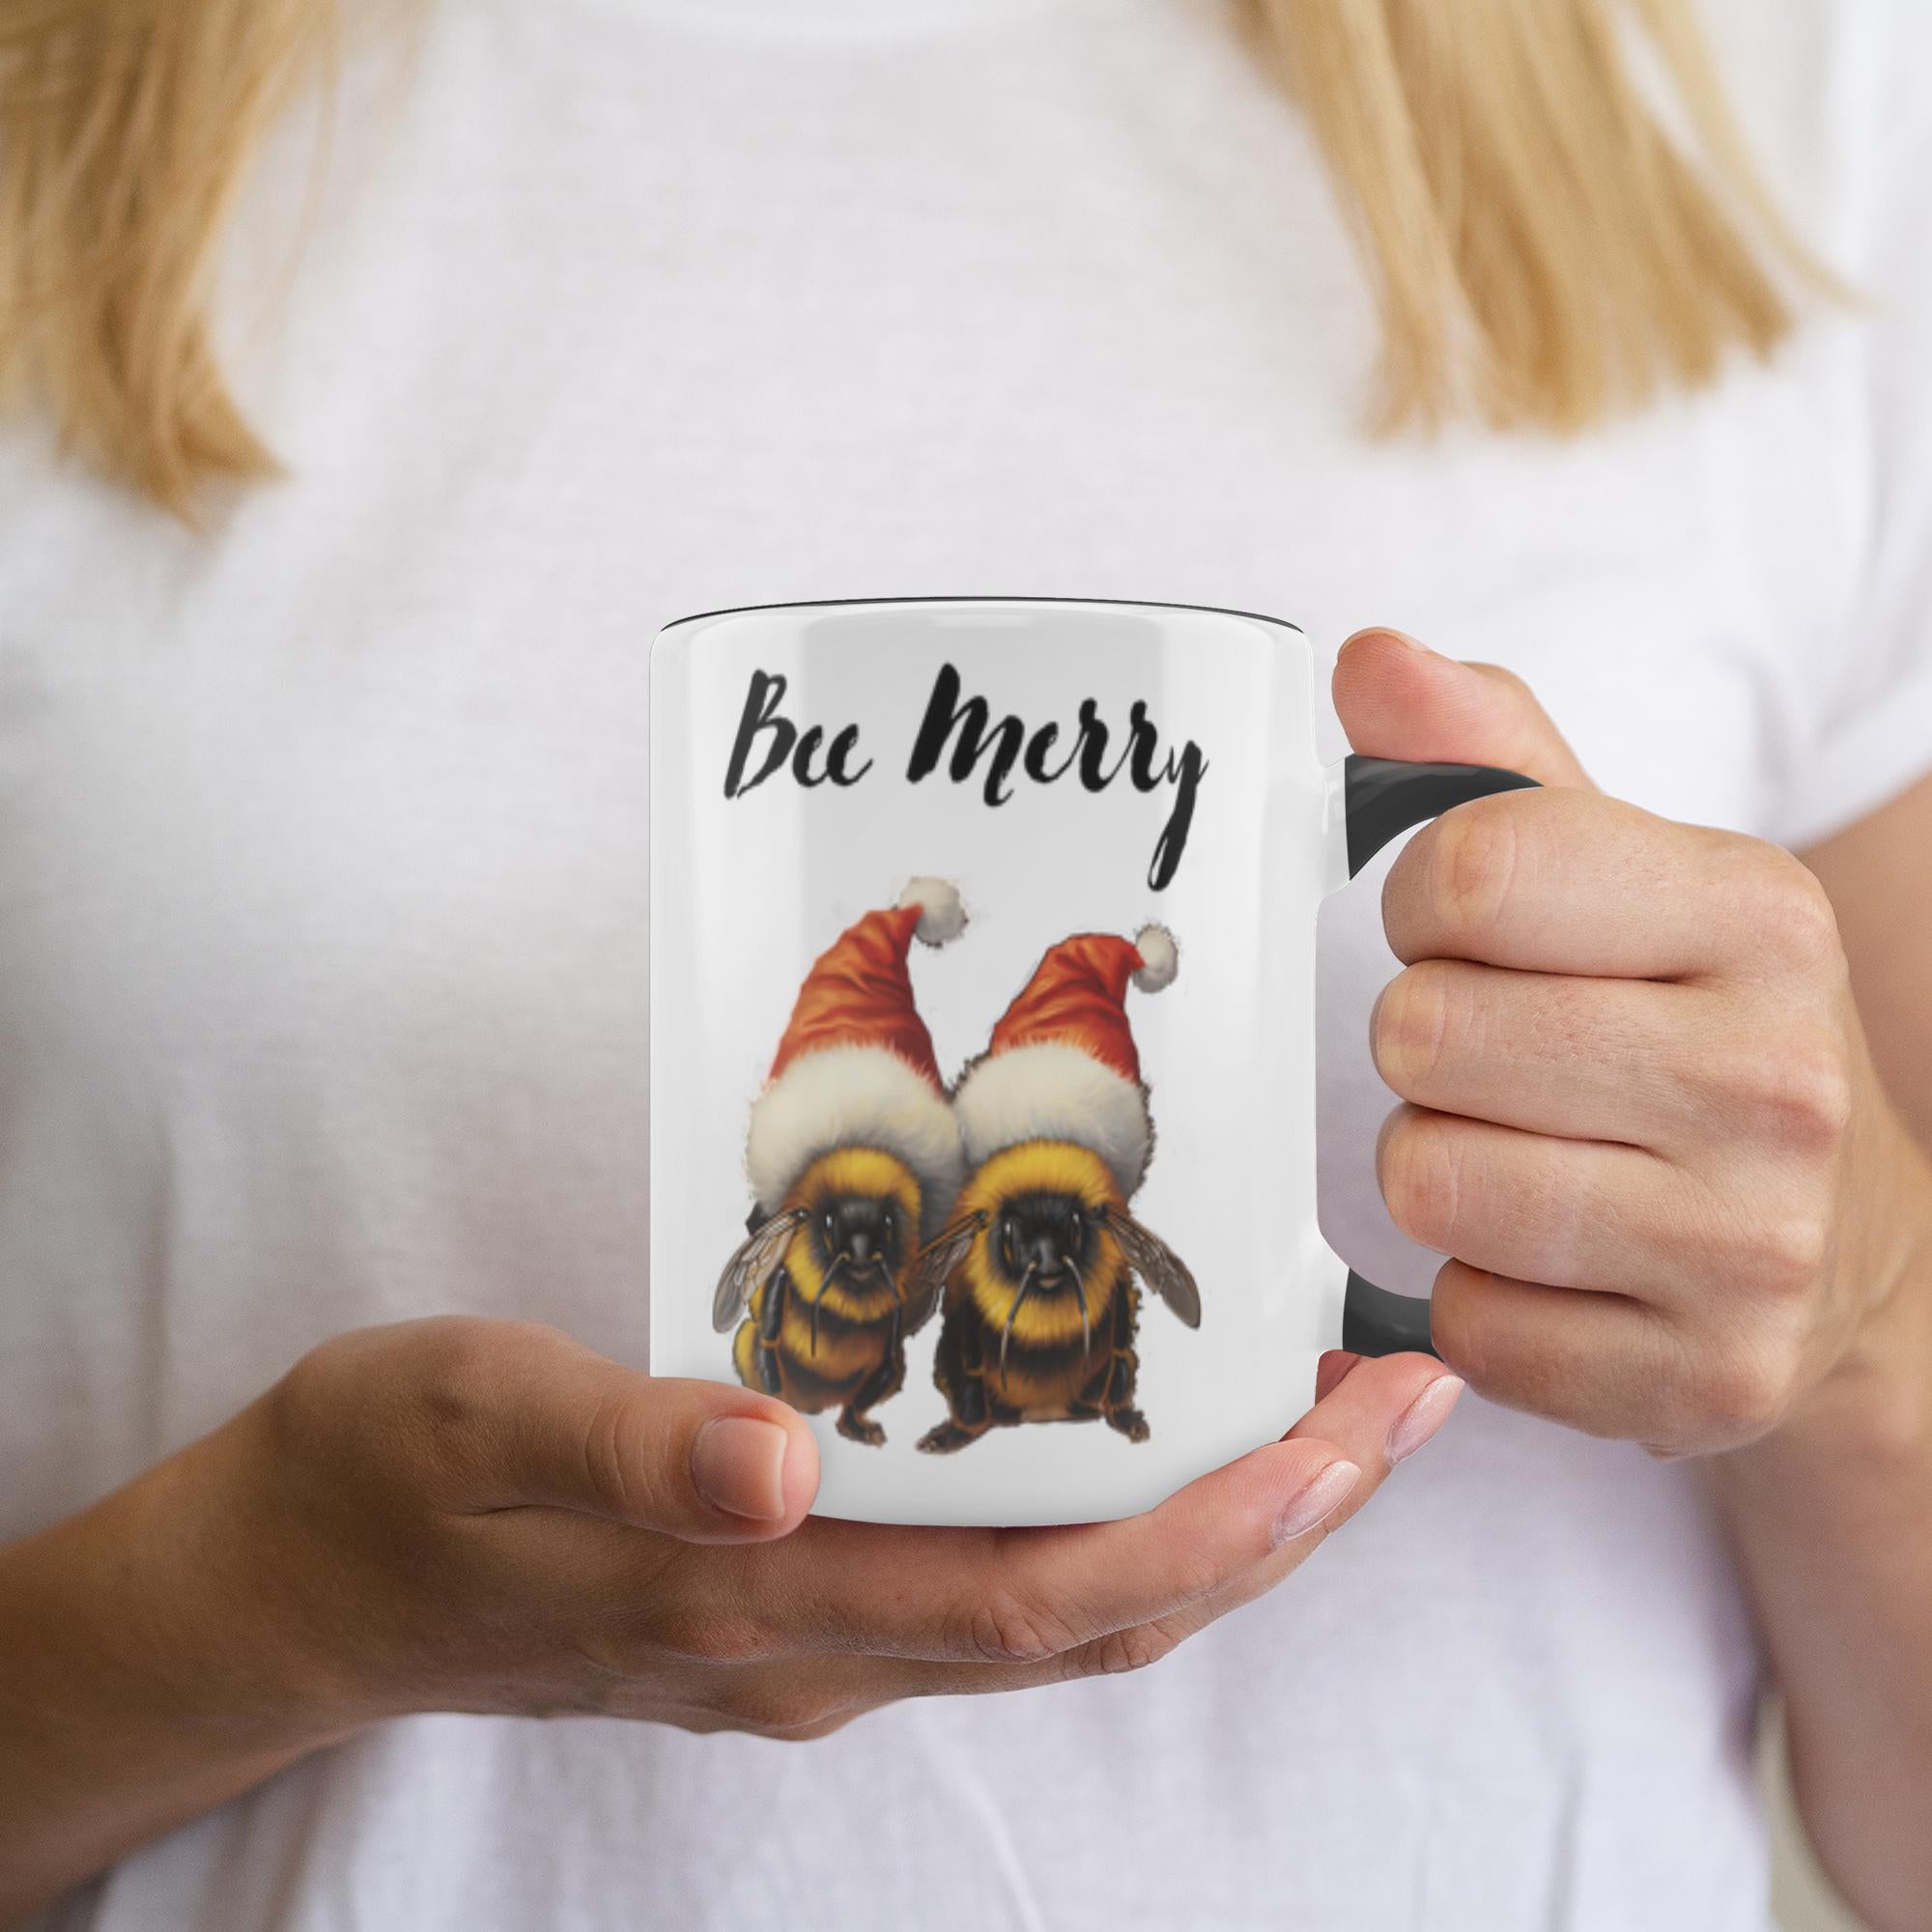 Bee Merry Accent Mug 11 oz White with Black Accents Coffee & Tea Cups gifts holiday store